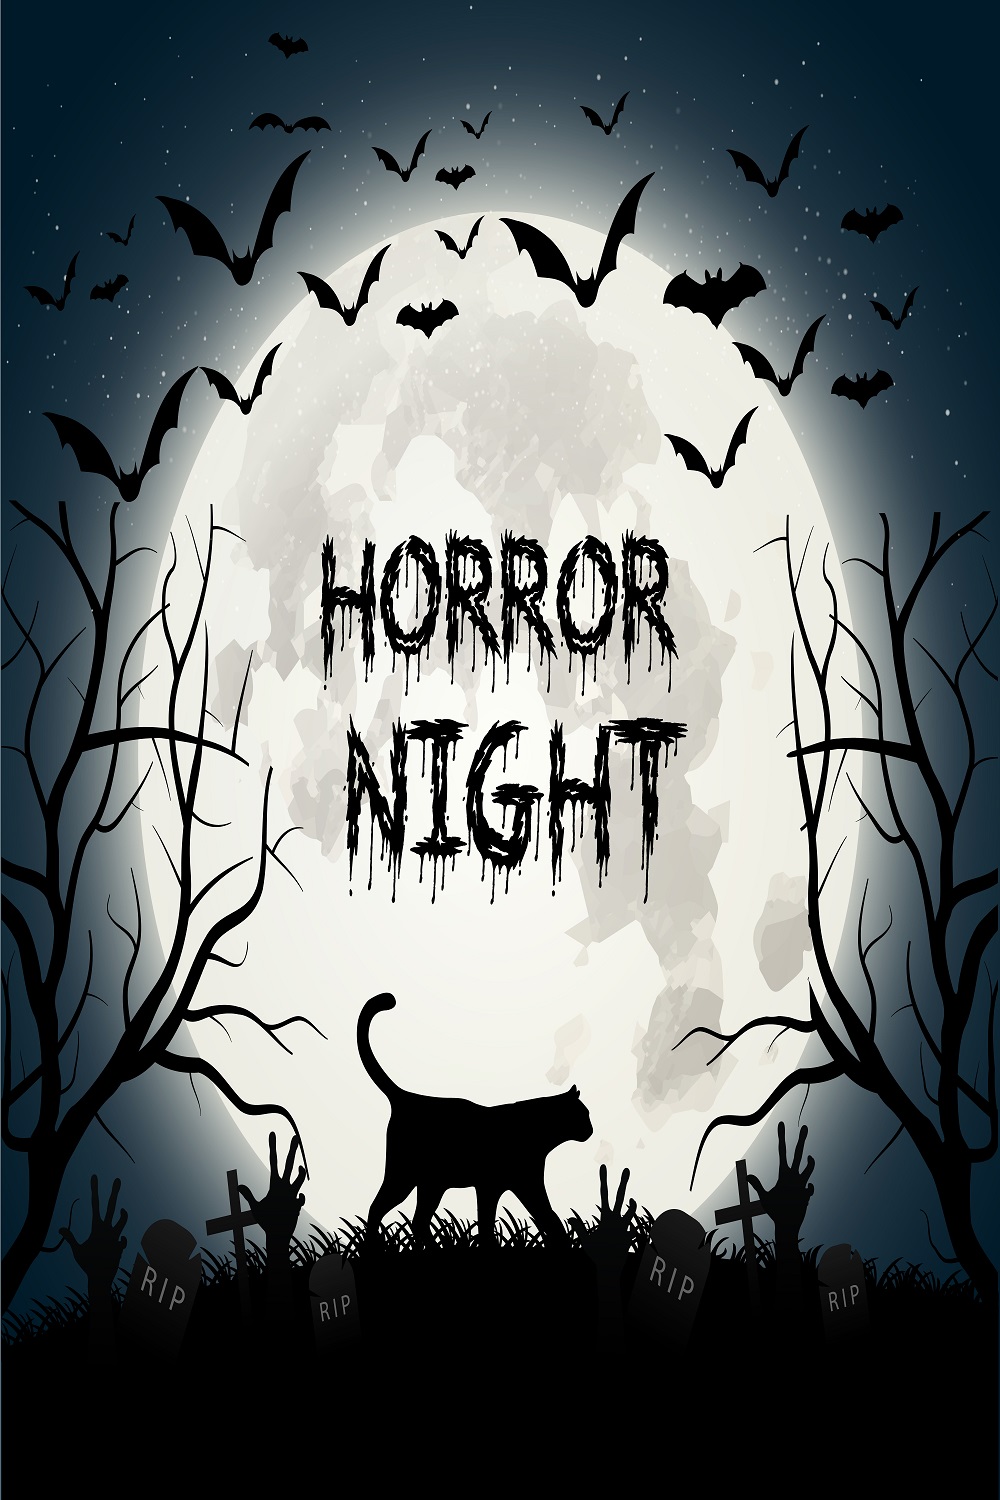 Creepy Halloween background with cat bats pinterest preview image.